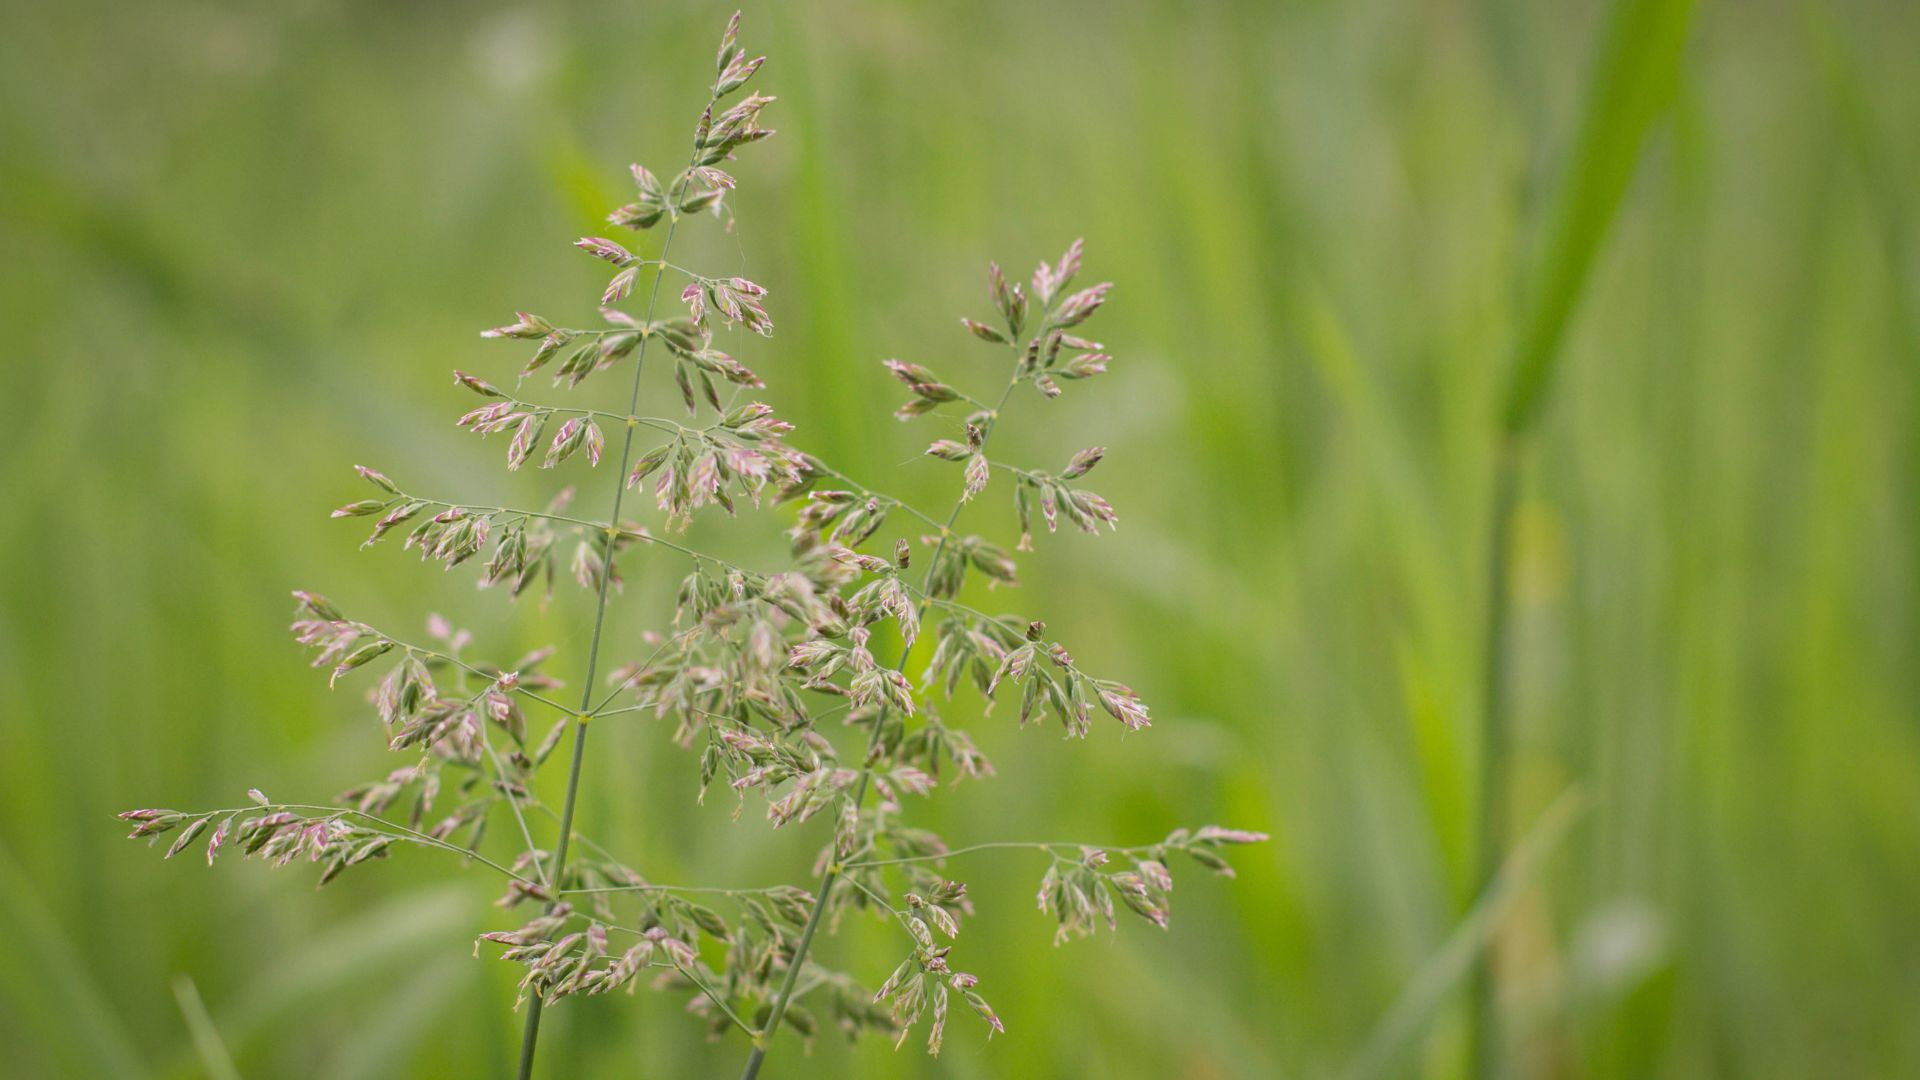 An image of a tall stalk of poa annua grass.